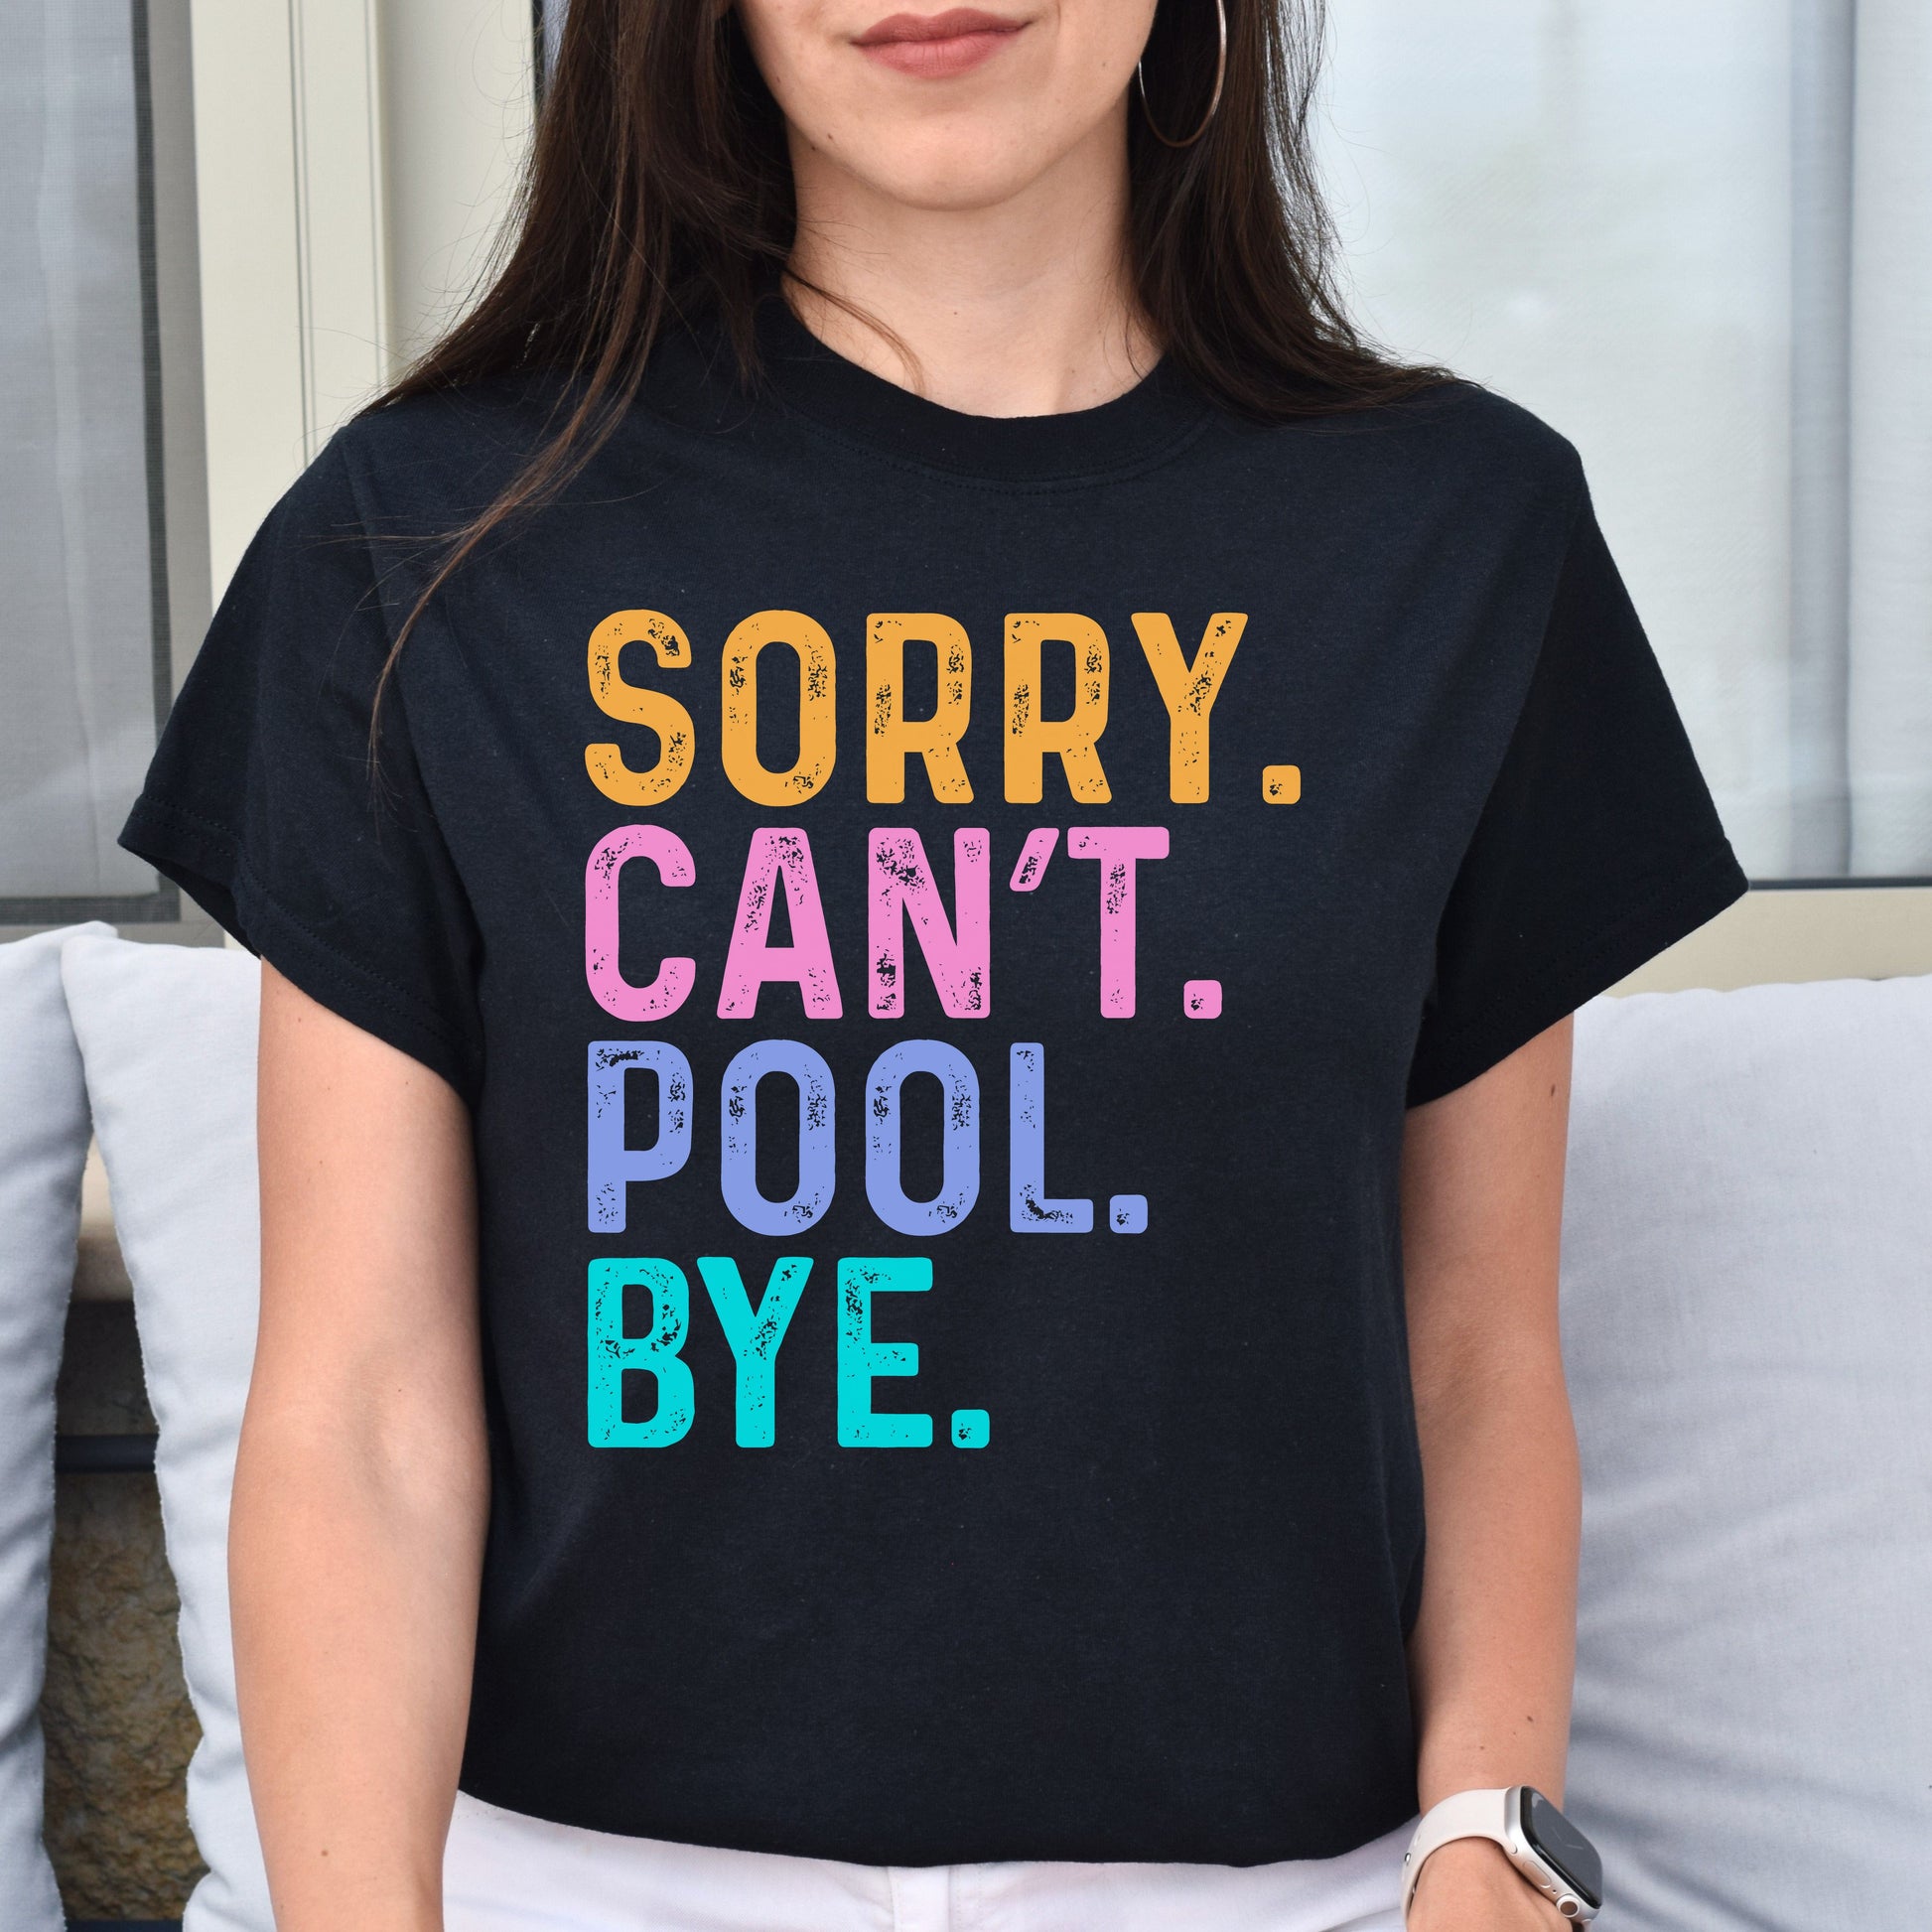 Pool player Unisex t-shirt Sorry Can't Pool Bye tee black dark heather-Family-Gift-Planet